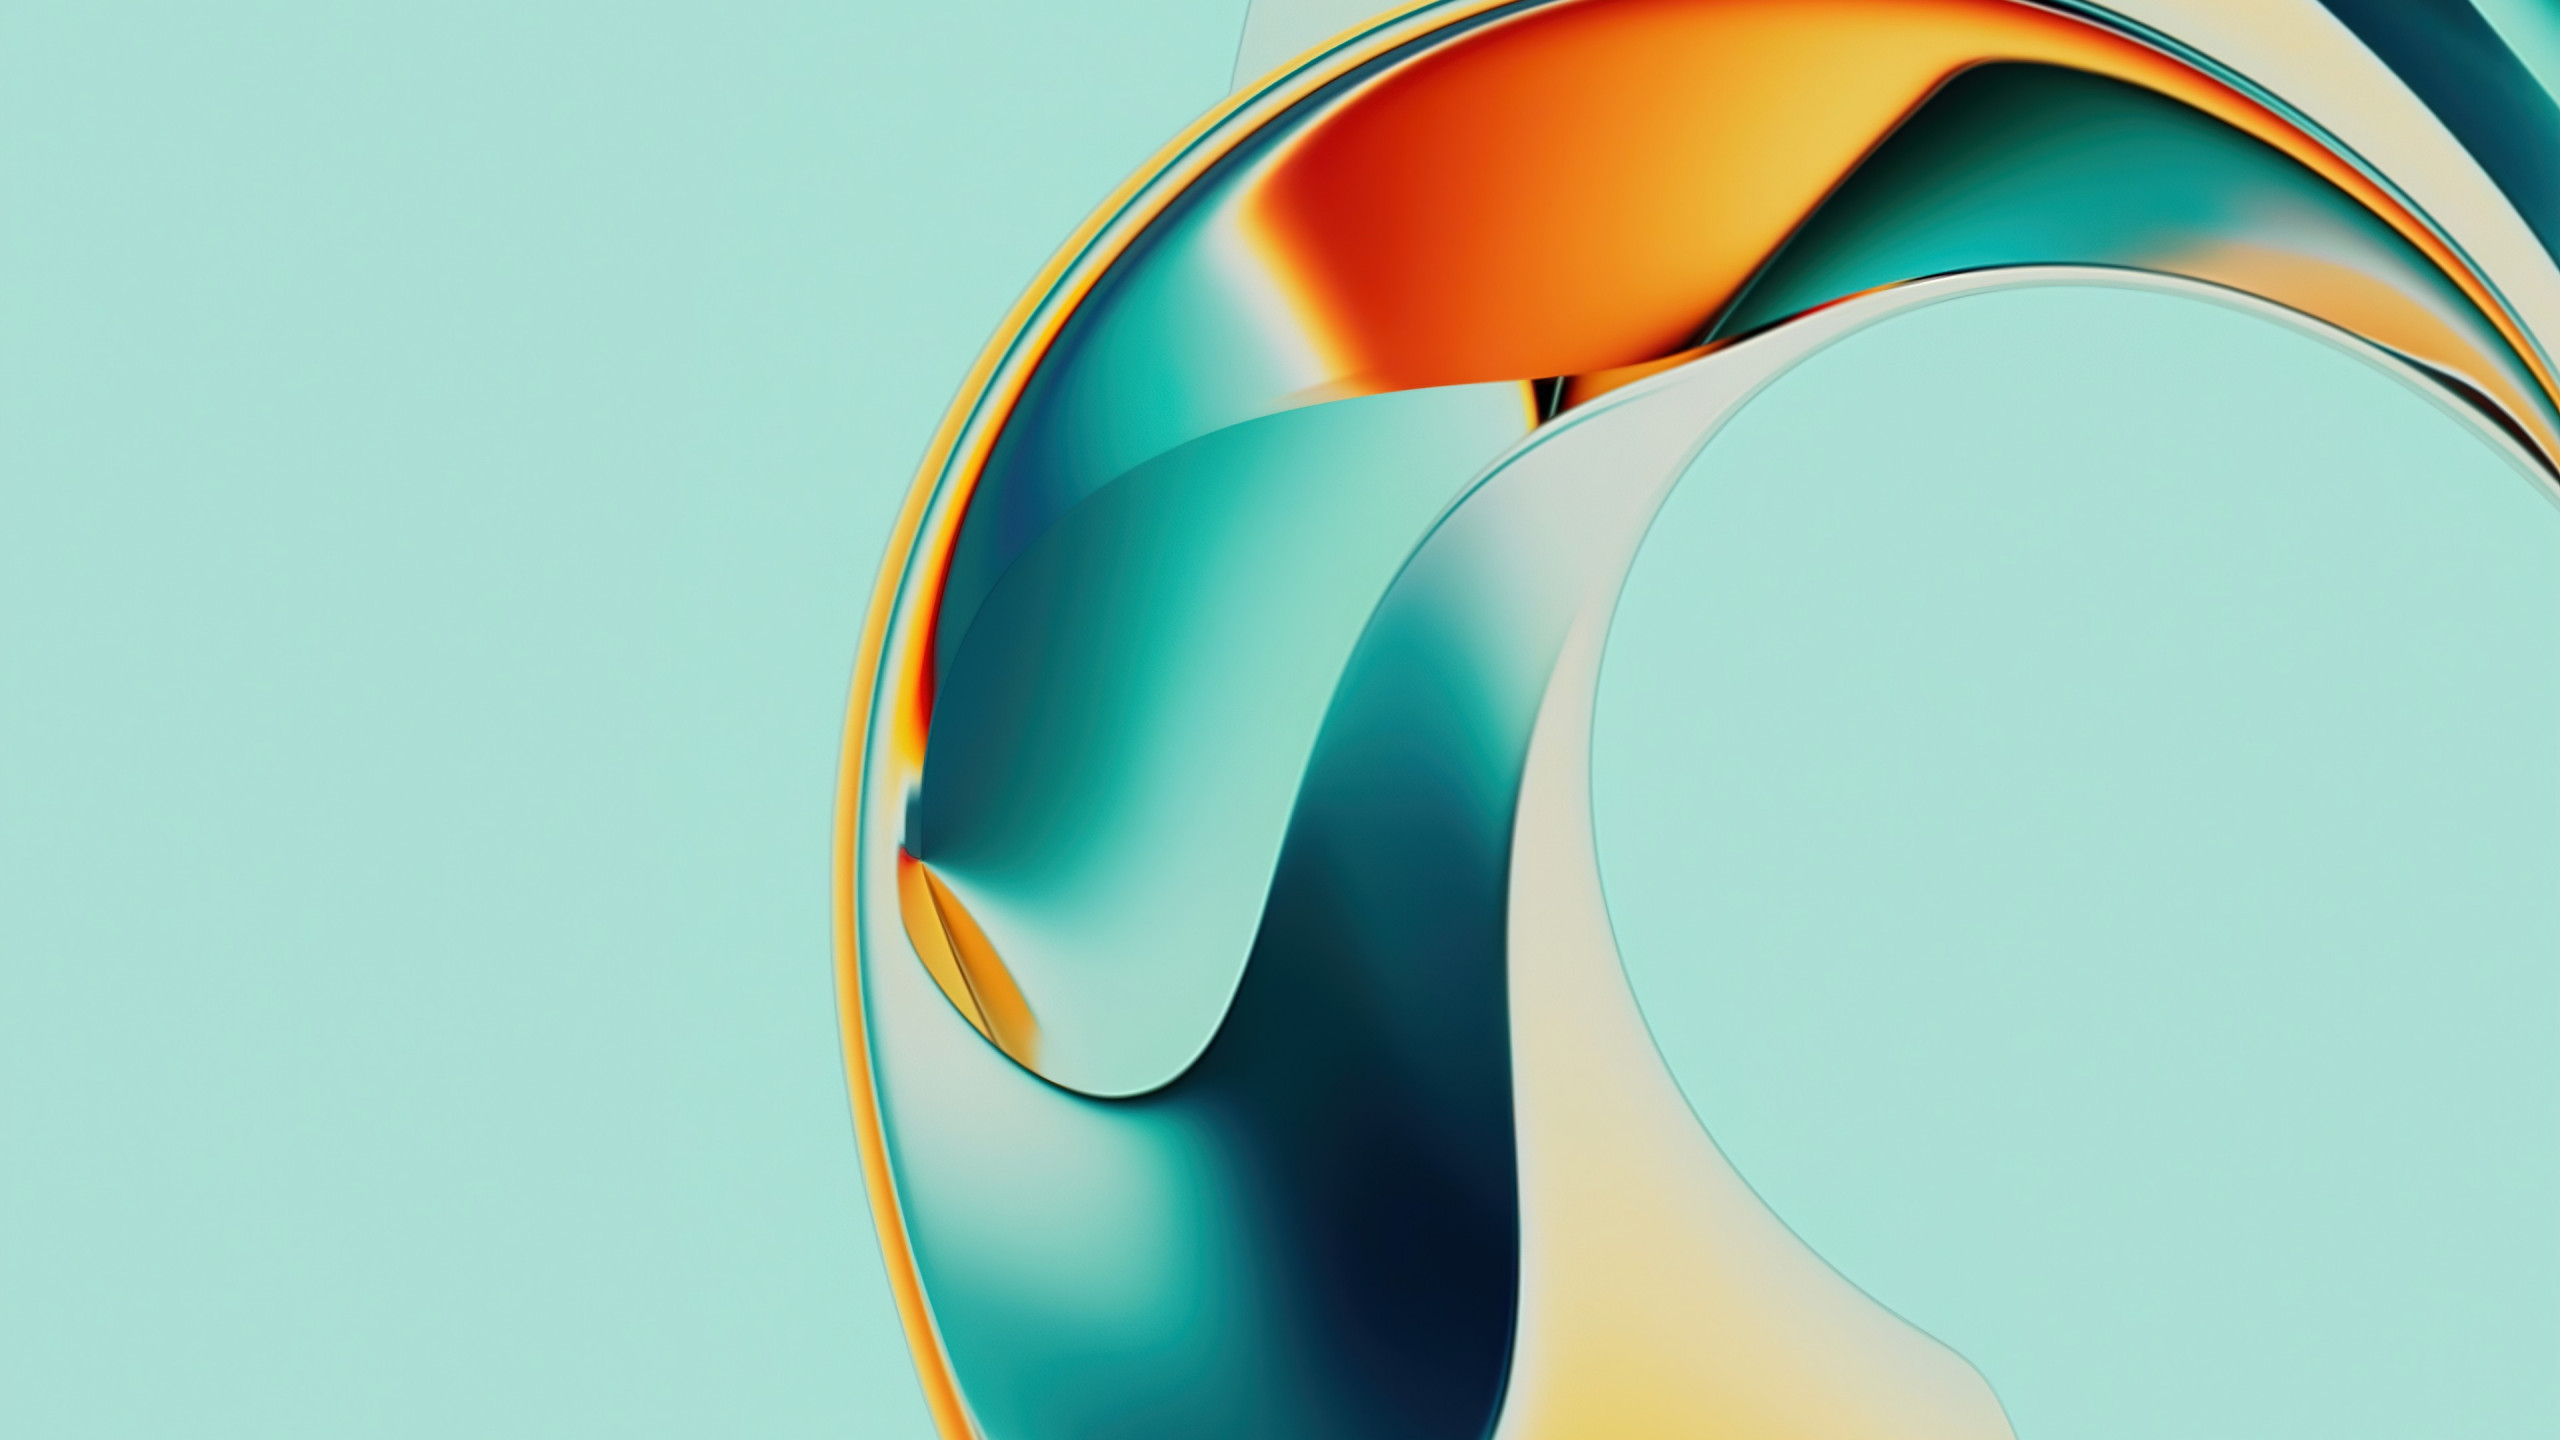 Abstract design in P60 Pro wallpaper 2560x1440